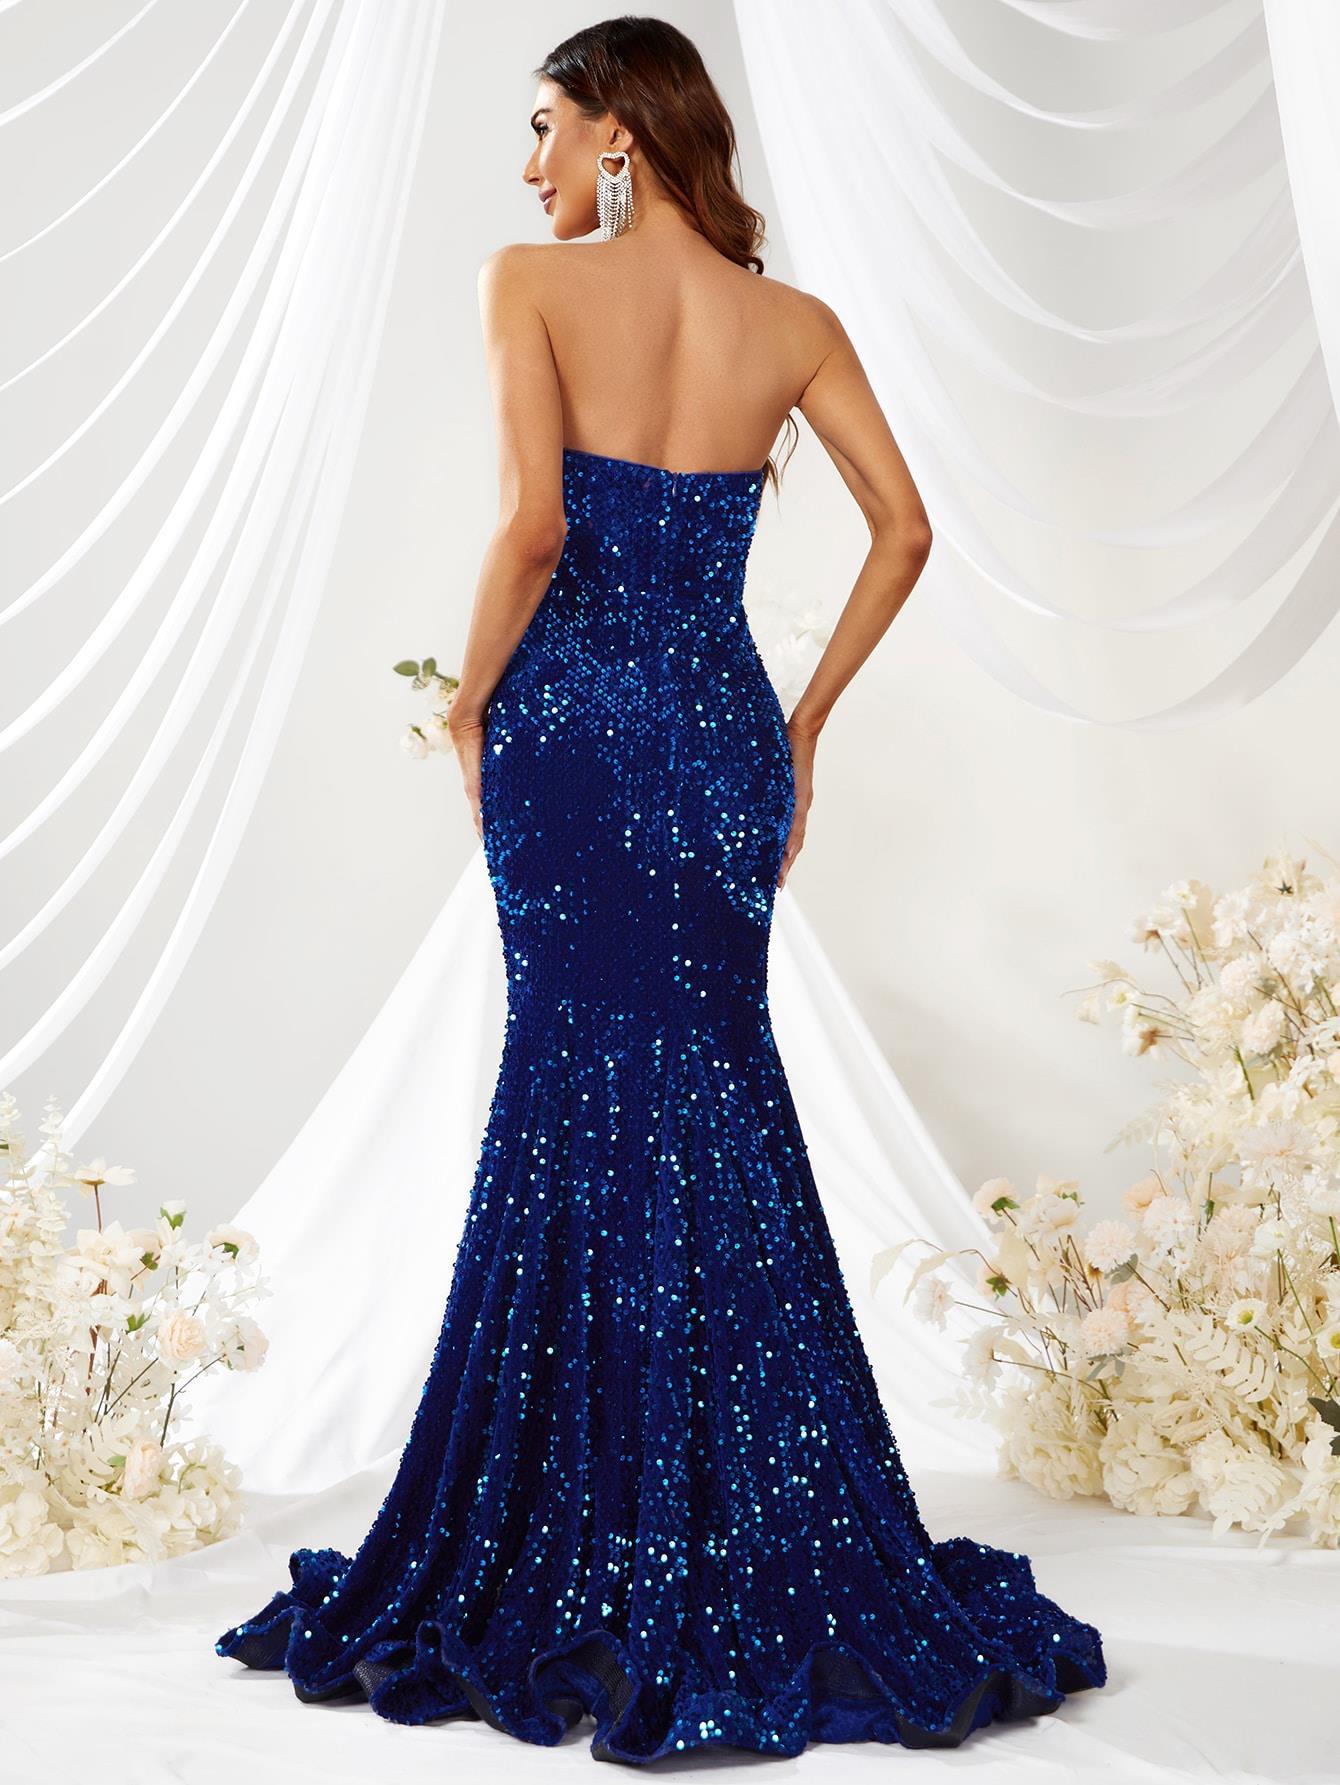 Sparkling Strapless Sweetheart Sequin Mermaid Evening Gown